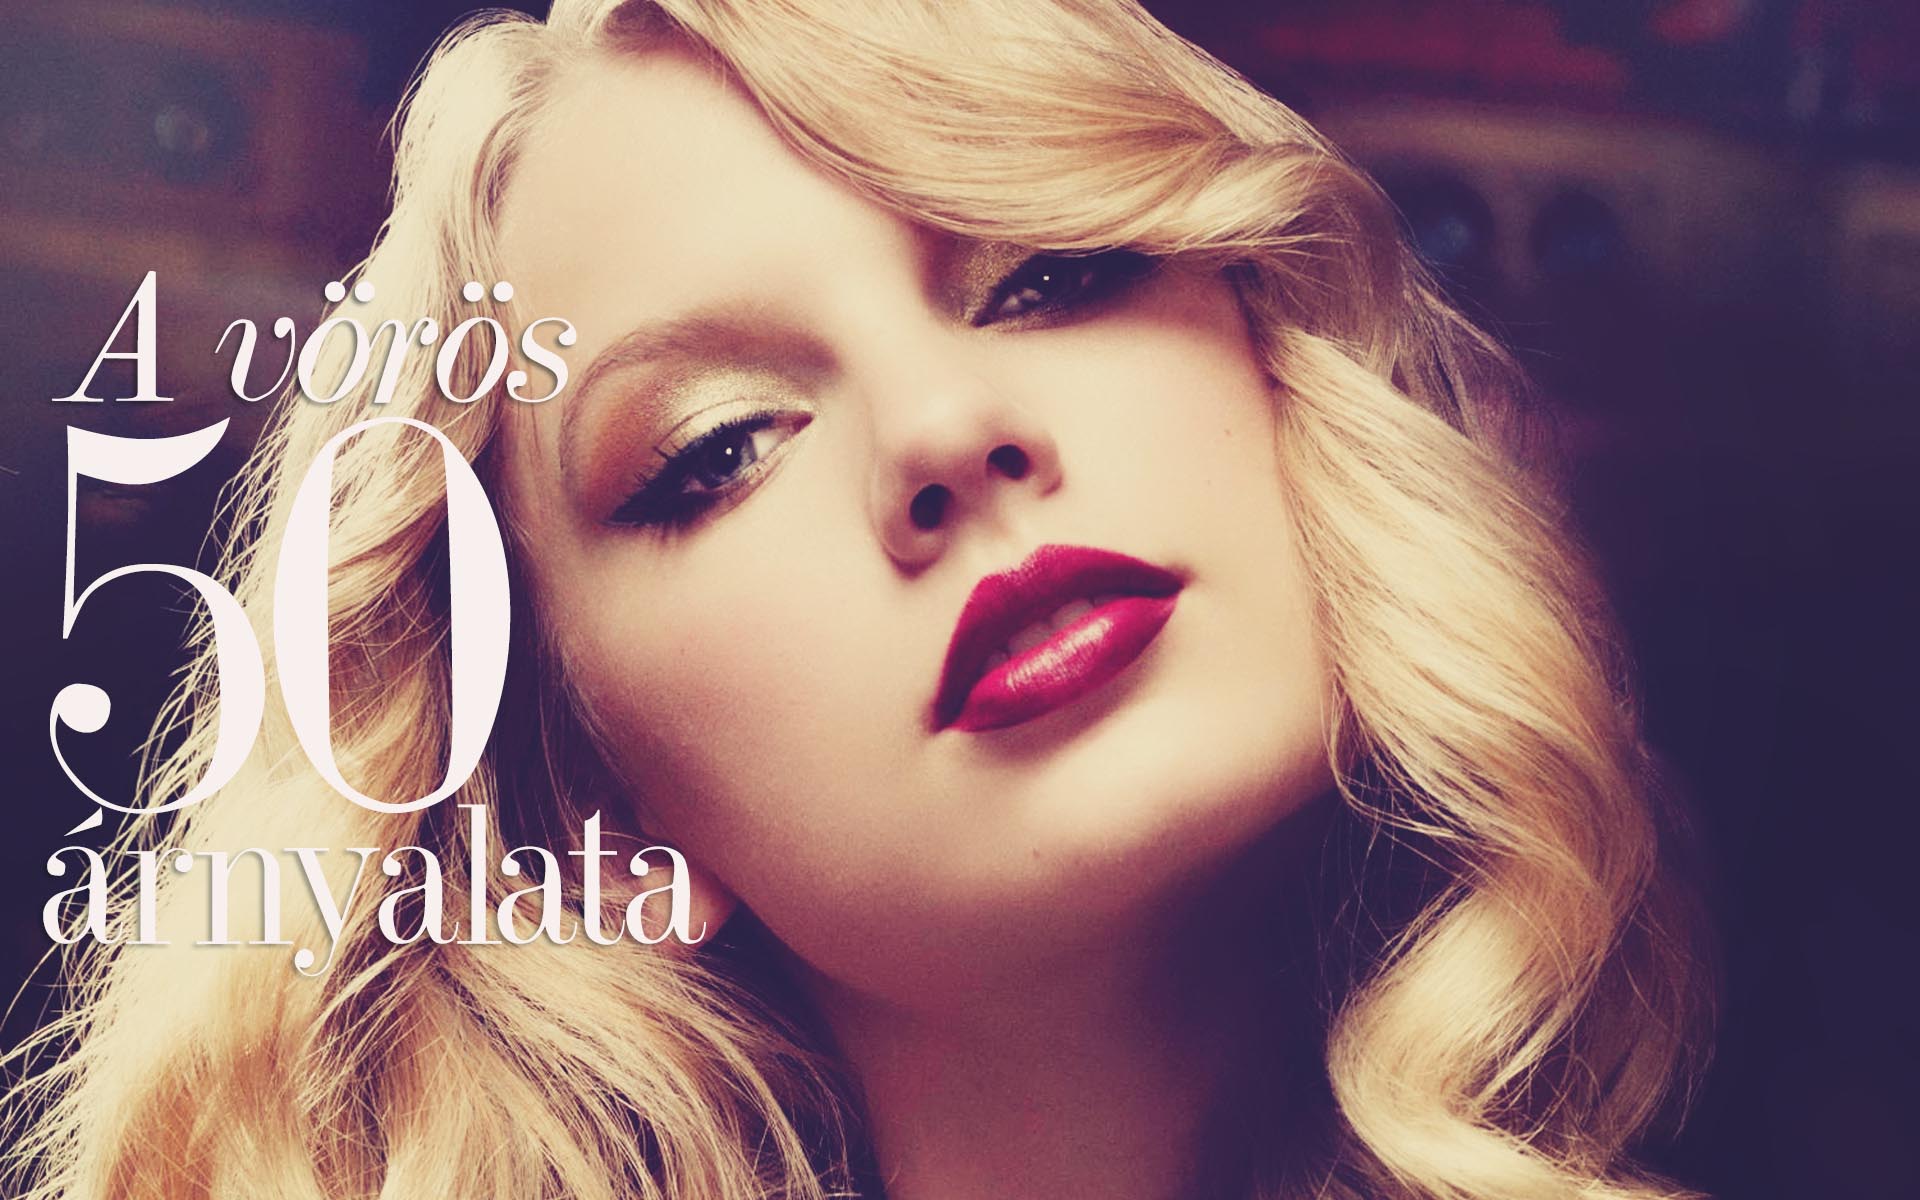 music_taylor_swift_red_lipstick_045774cover.jpg